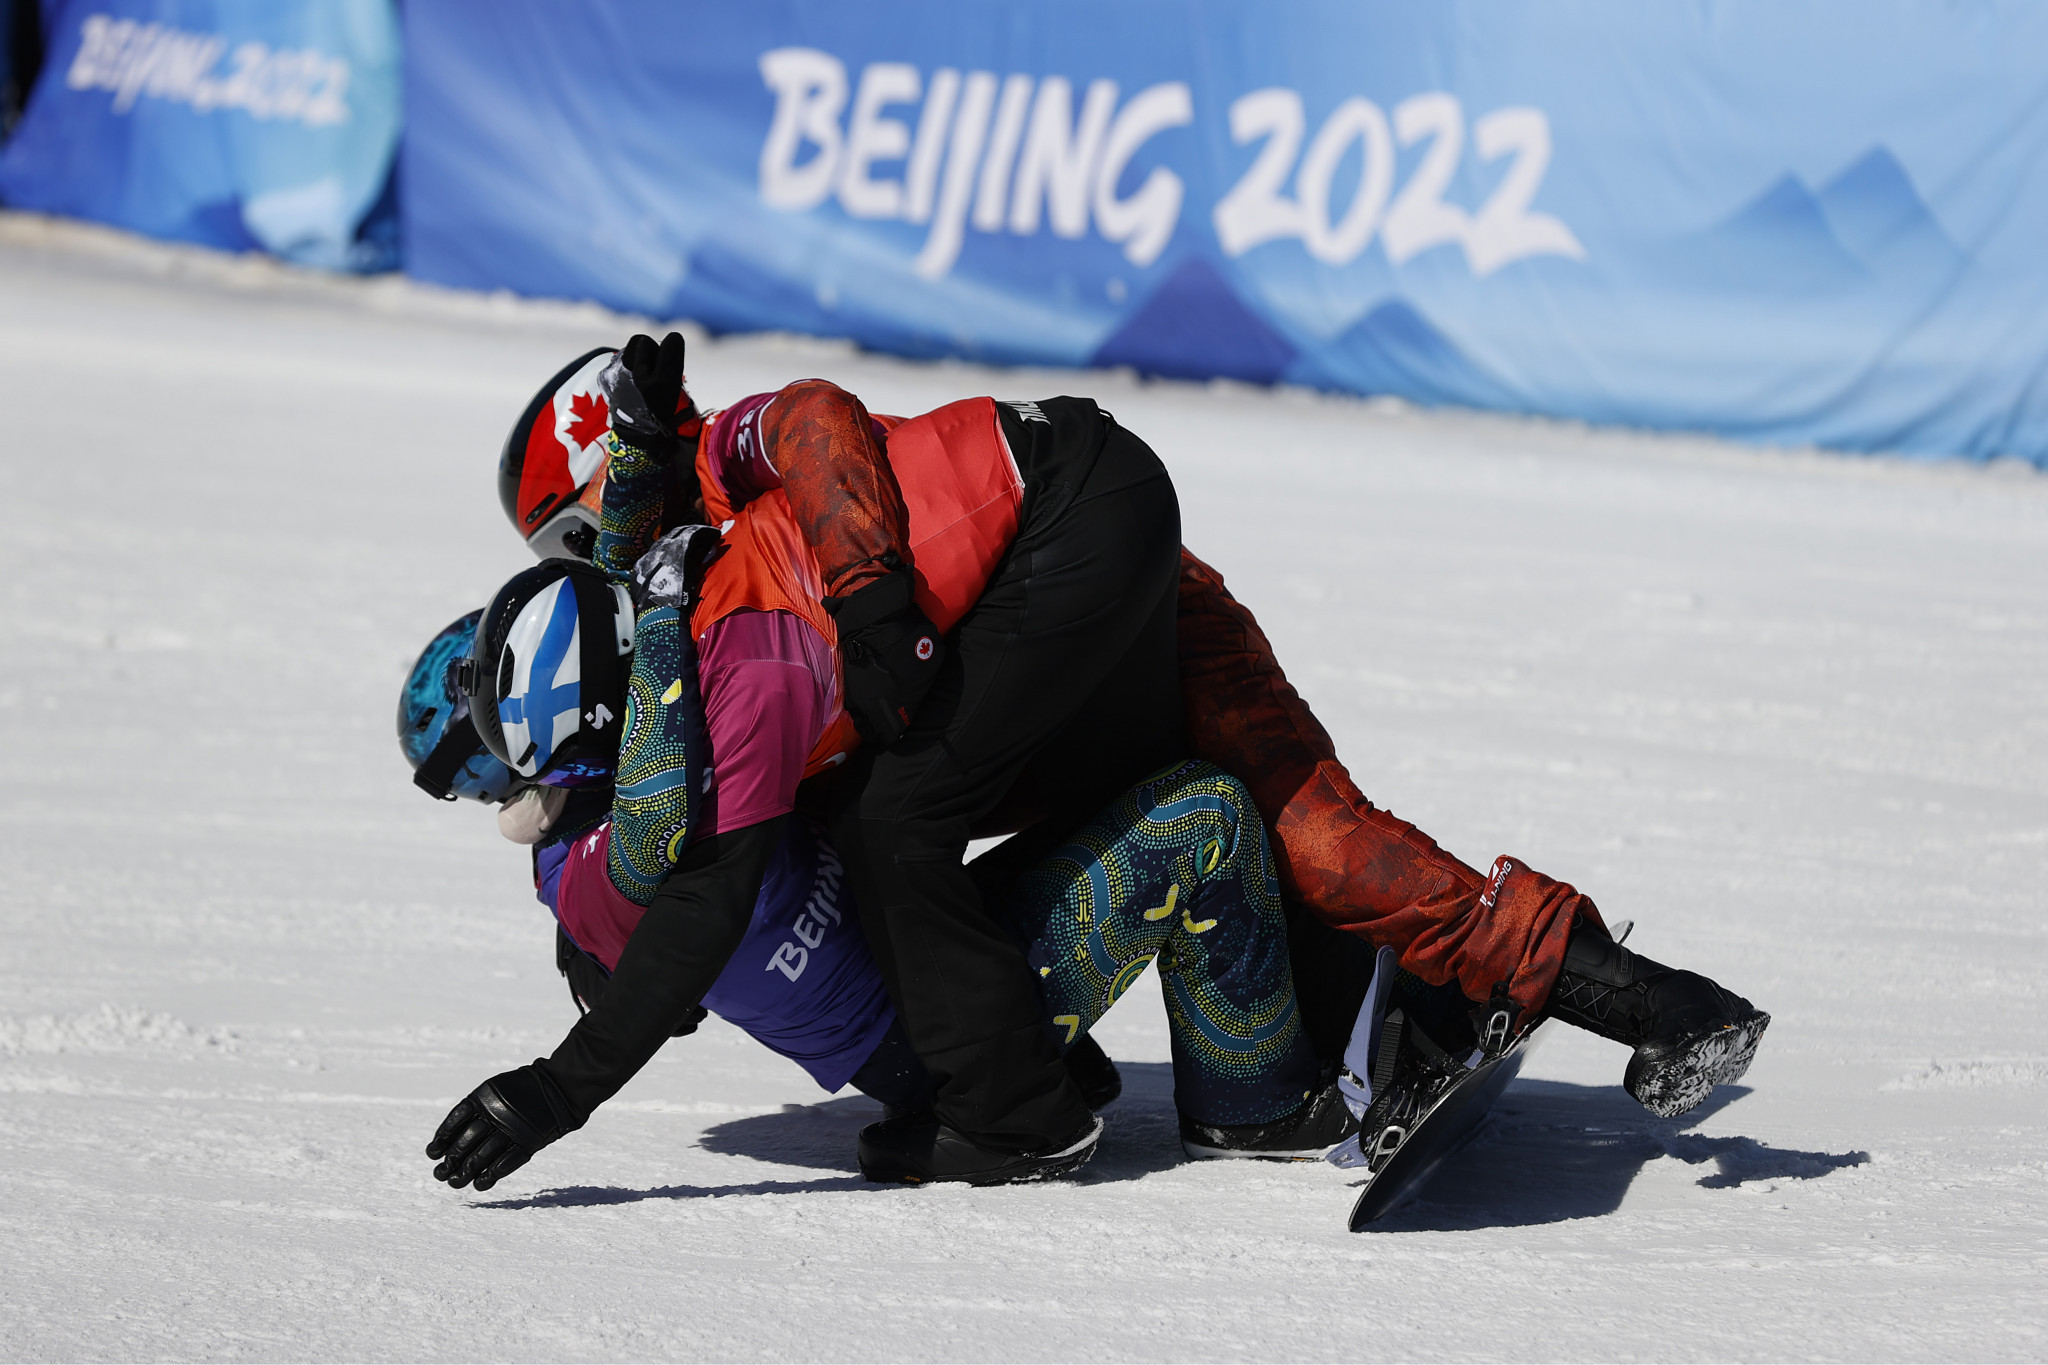 Finland's Matti-Suur Hamari, Australian Ben Tudhope and Canada's Alex Massie embraced after the men's snowboard cross in their special helmets ©Getty Images